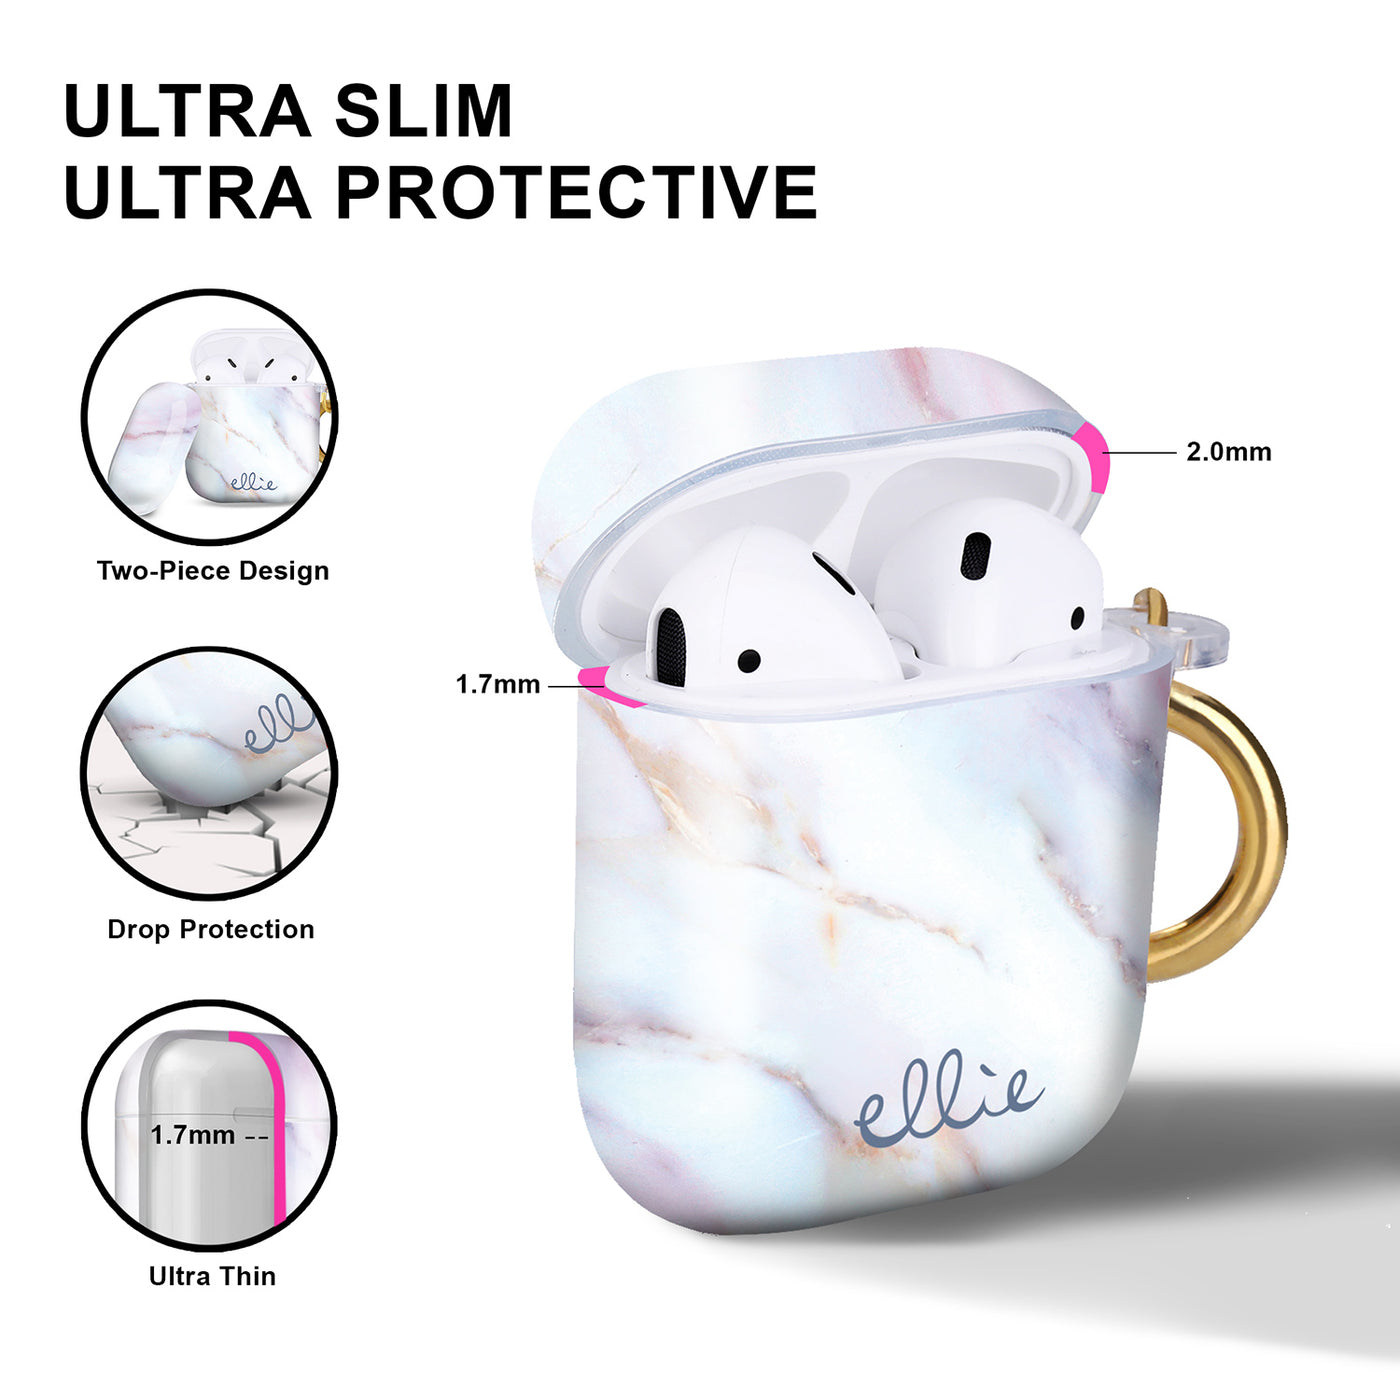 Two Piece Design, Drop Protection, Ultra Thin Desert Marble Airpods Case